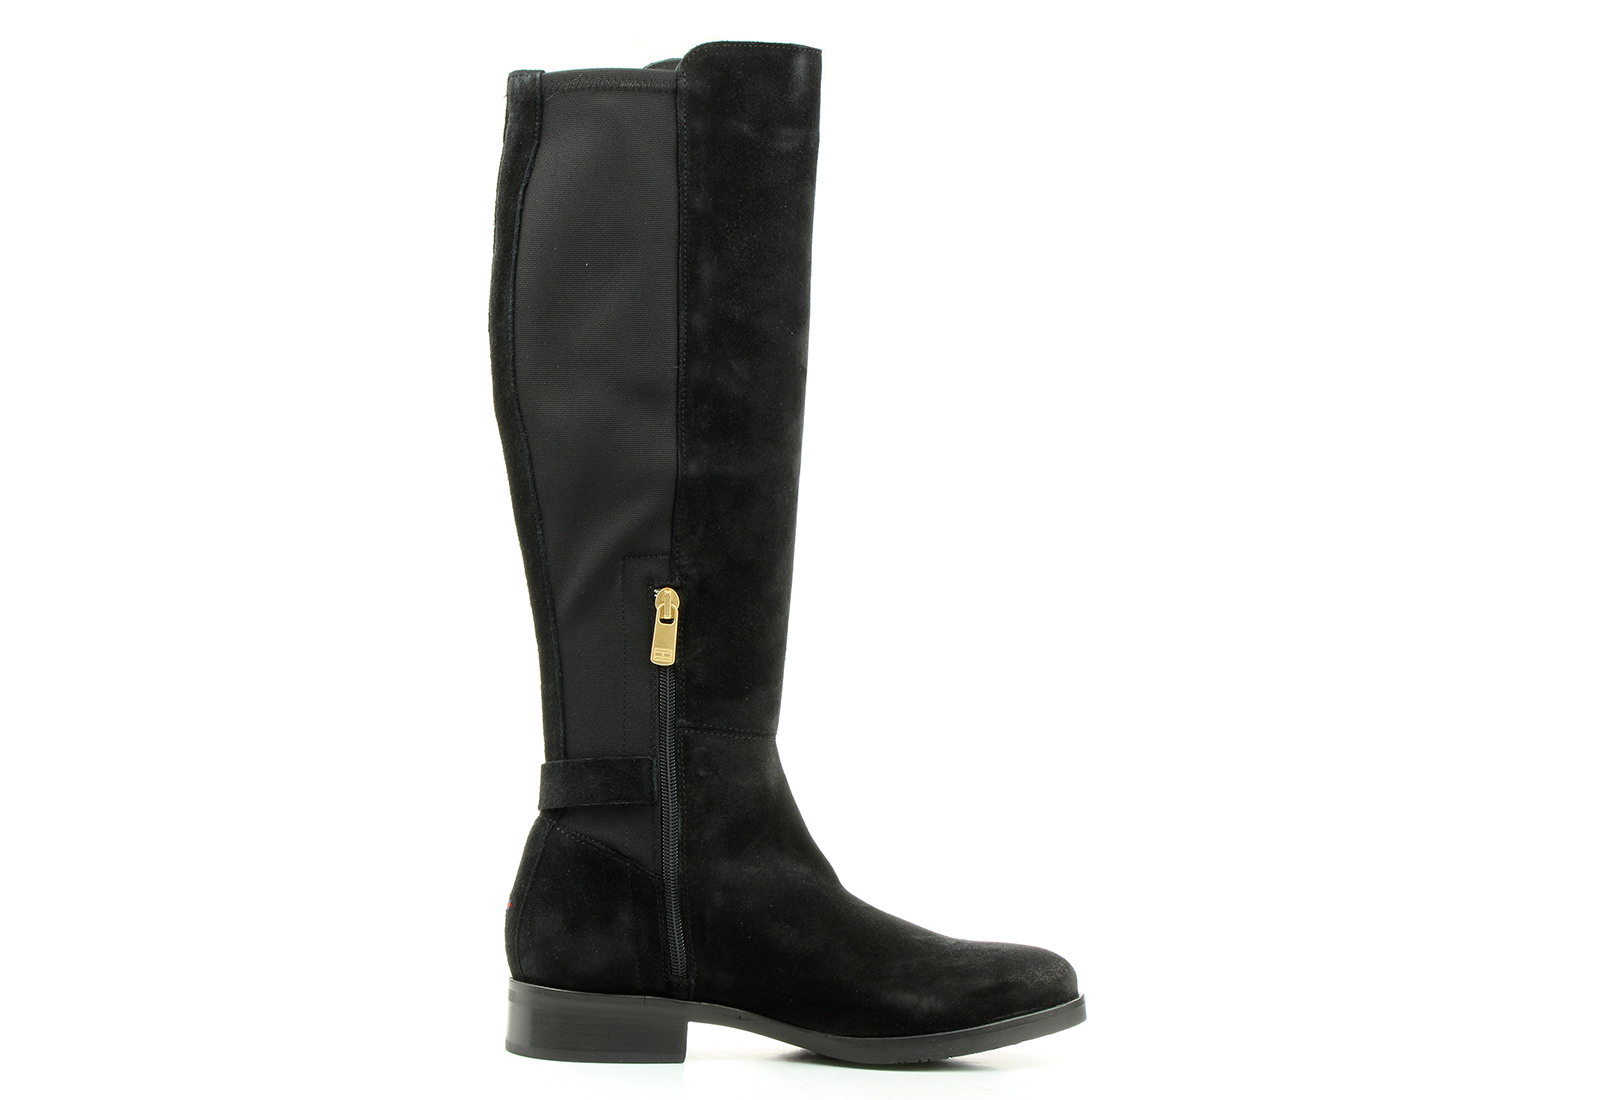 Tommy Tall boots - Tessa 6c - 18F-3065-990 Online shop for sneakers, shoes and boots